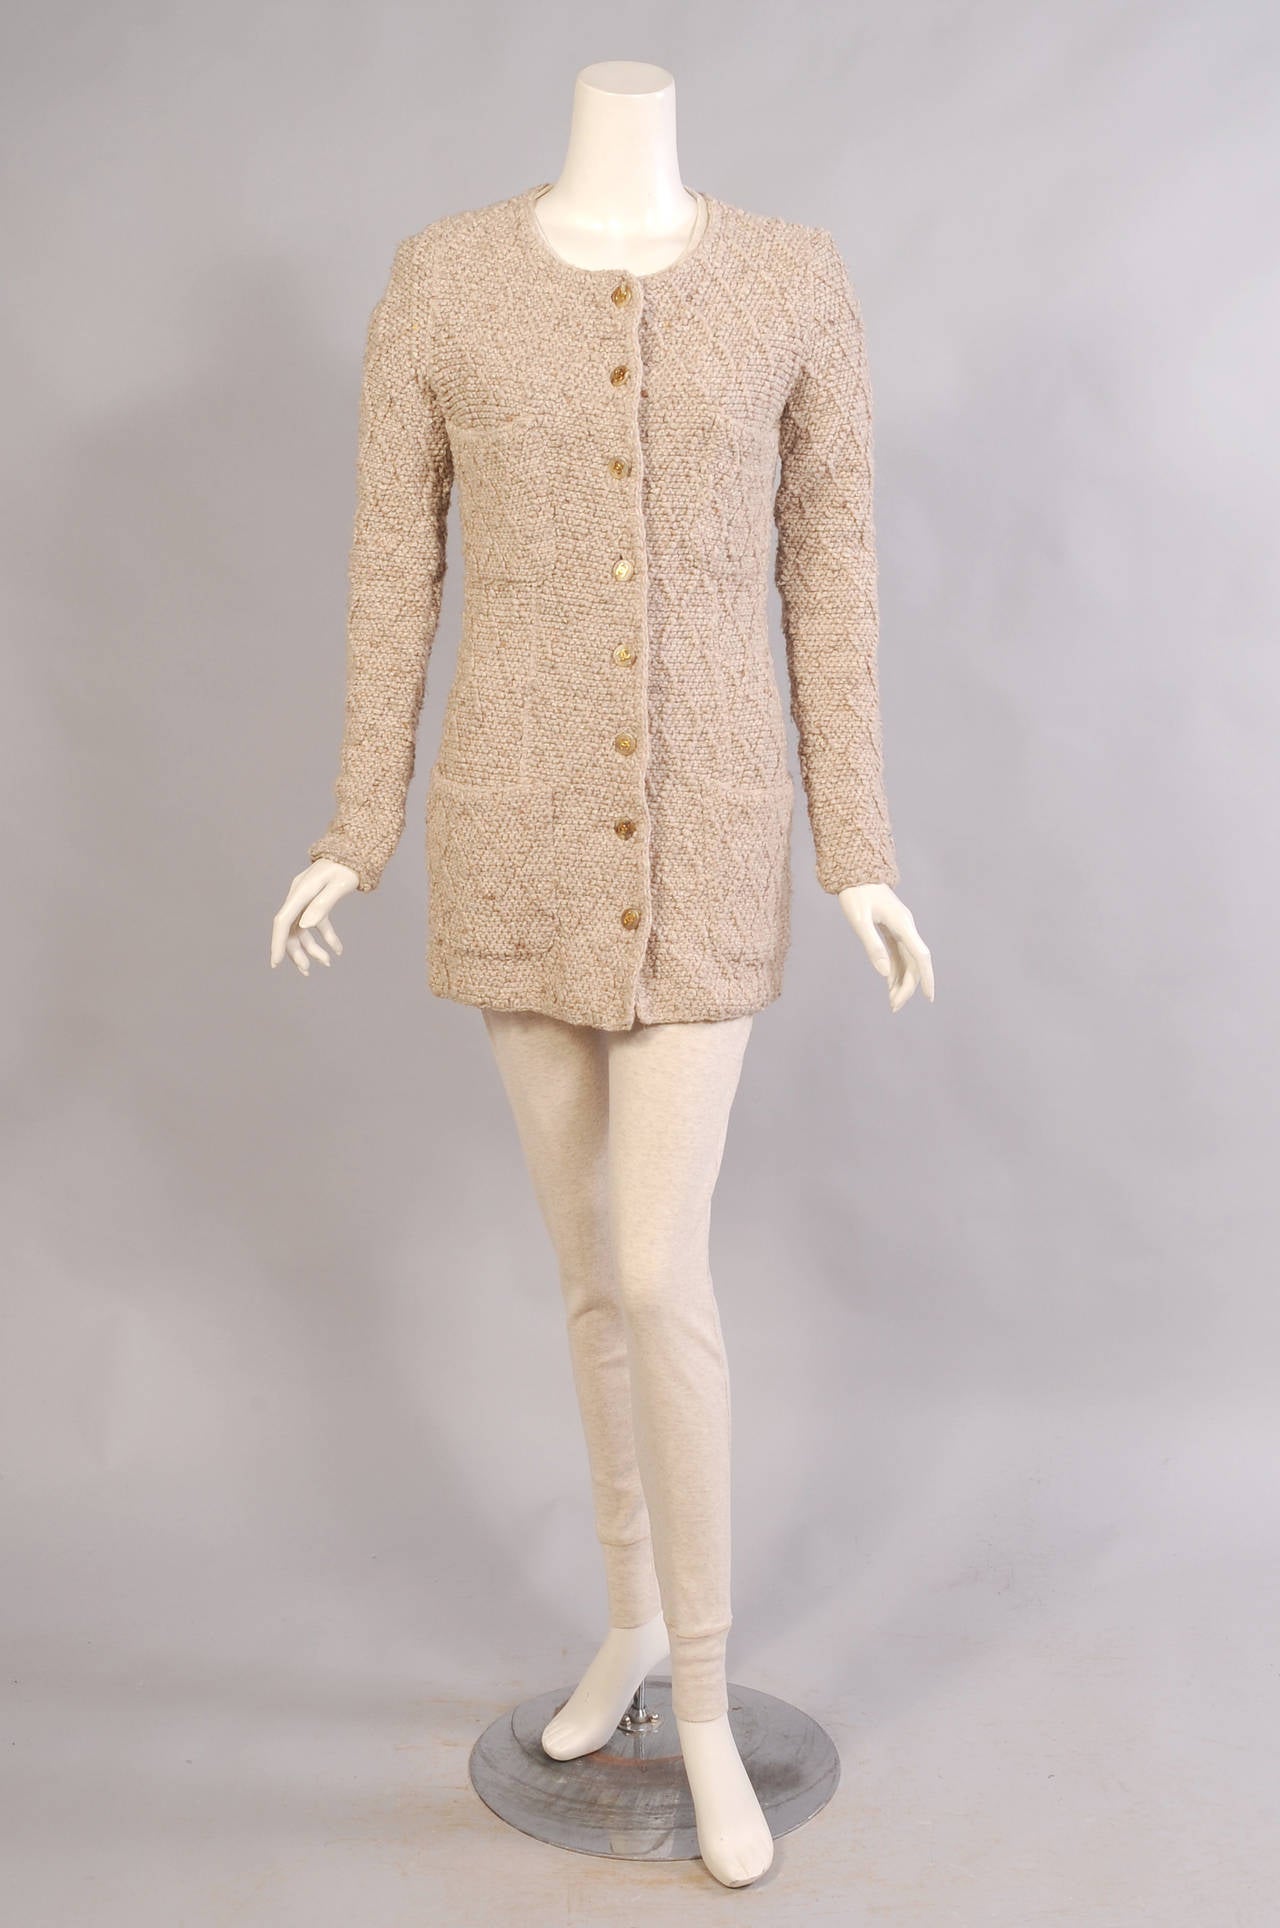 A classic beige tweed knit jacket has a lattice pattern for added interest. The Chanel  double C logo buttons and four patch pockets add to the look. It is in excellent condition and marked a size 38.